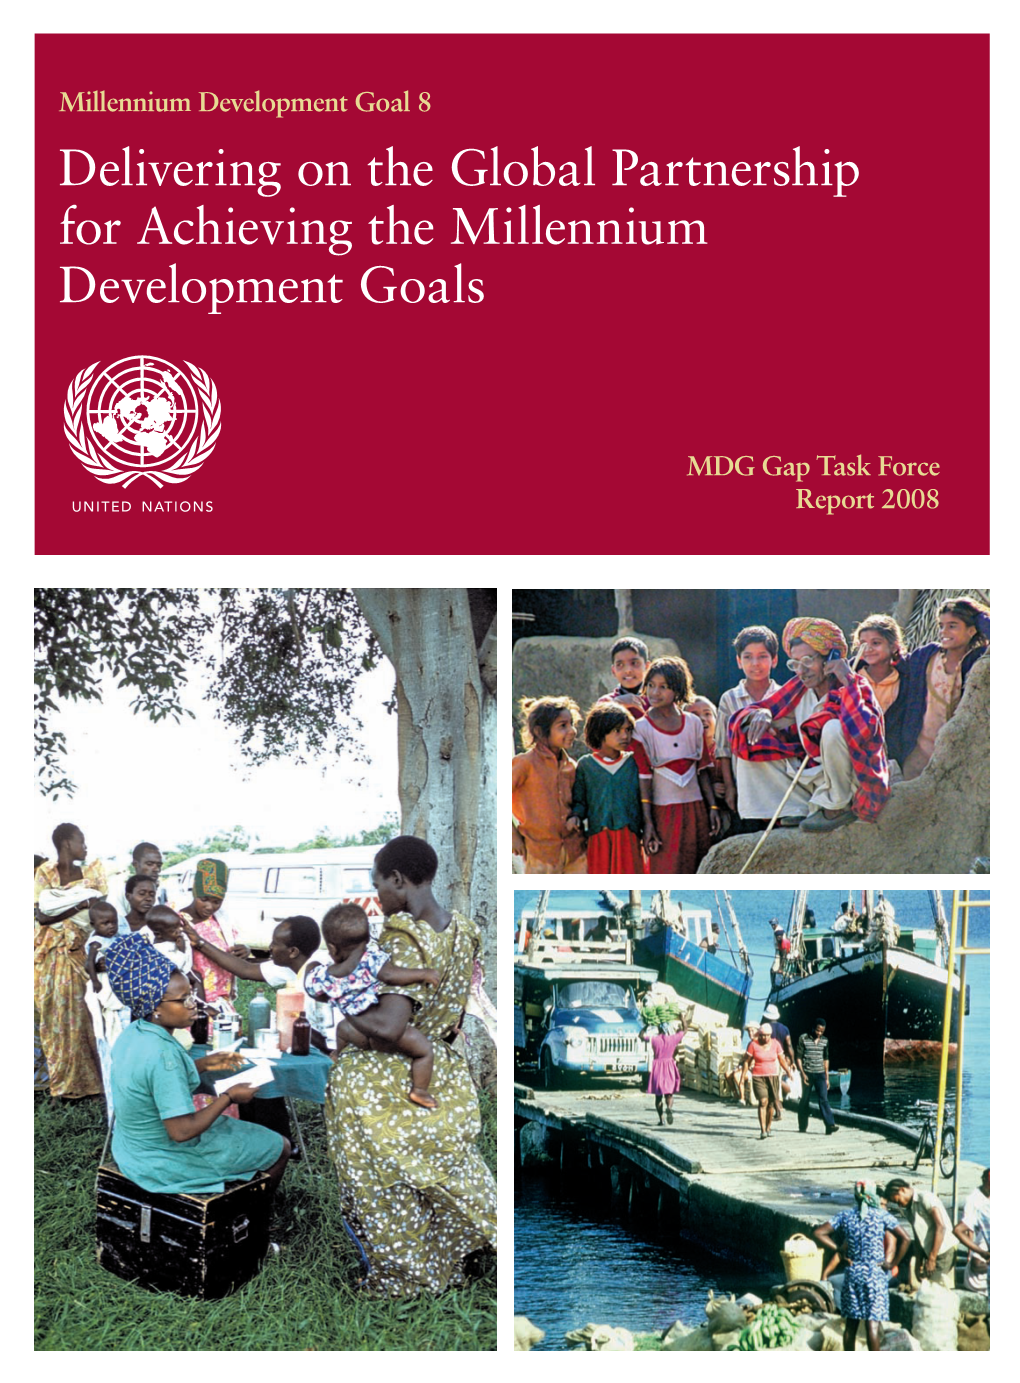 Delivering on the Global Partnership for Achieving the Millennium Development Goals